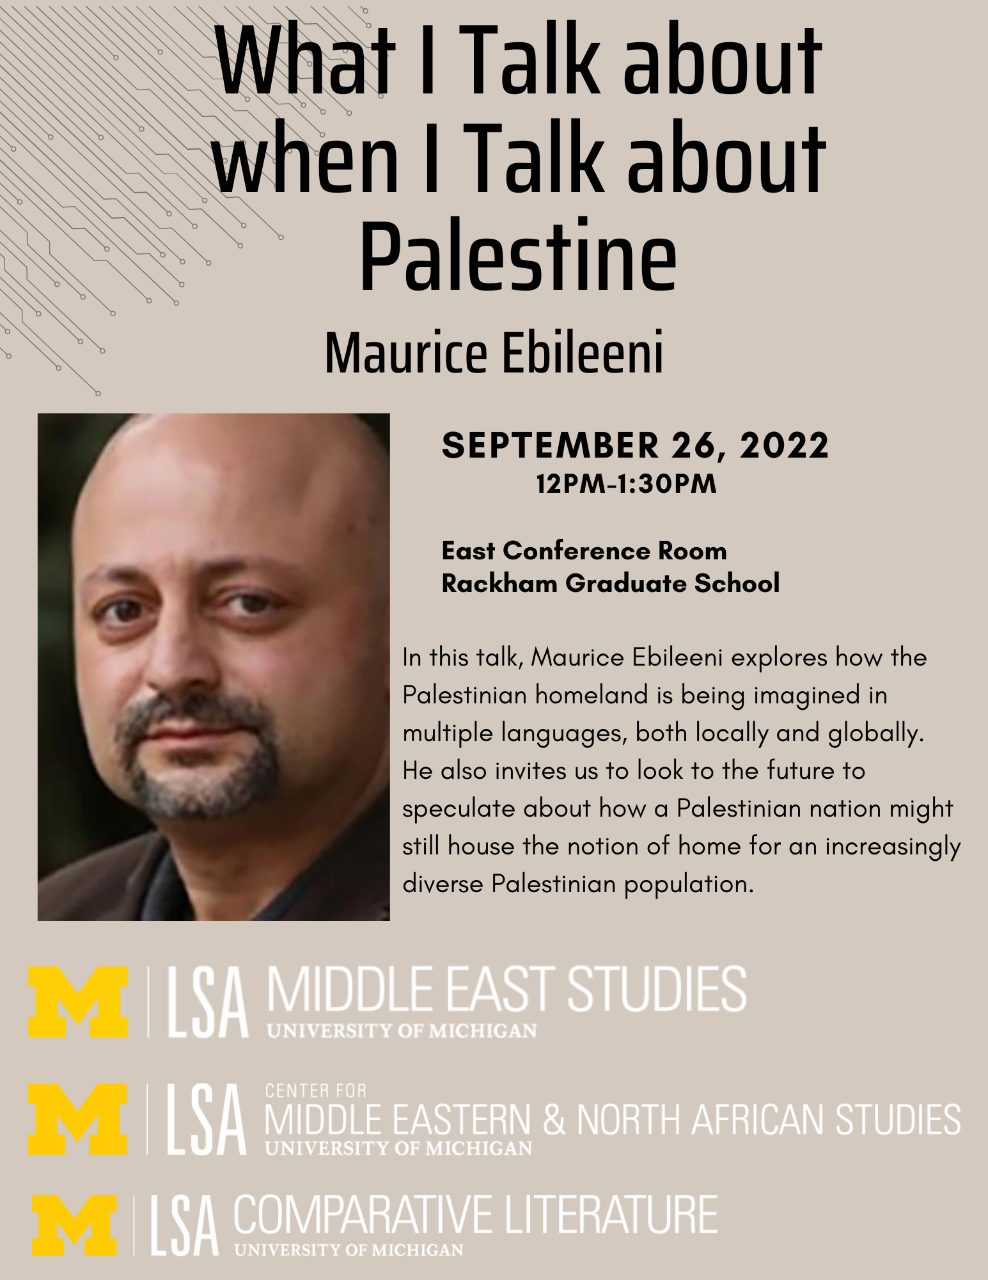 Text, “What I Talk about when I Talk about Palestine with Maurice Ebileeni, September 26, 2022 12 PM-1:30 PM, East Conference Room, Rackham Graduate School. In this talk, Maurice Ebileeni explores how the Palestinian homeland is being imagined in multiple languages, both locally and globally. He also invites us to look to the future to speculate about how a Palestinian nation might still house the notion of home for an increasingly diverse Palestinian population”